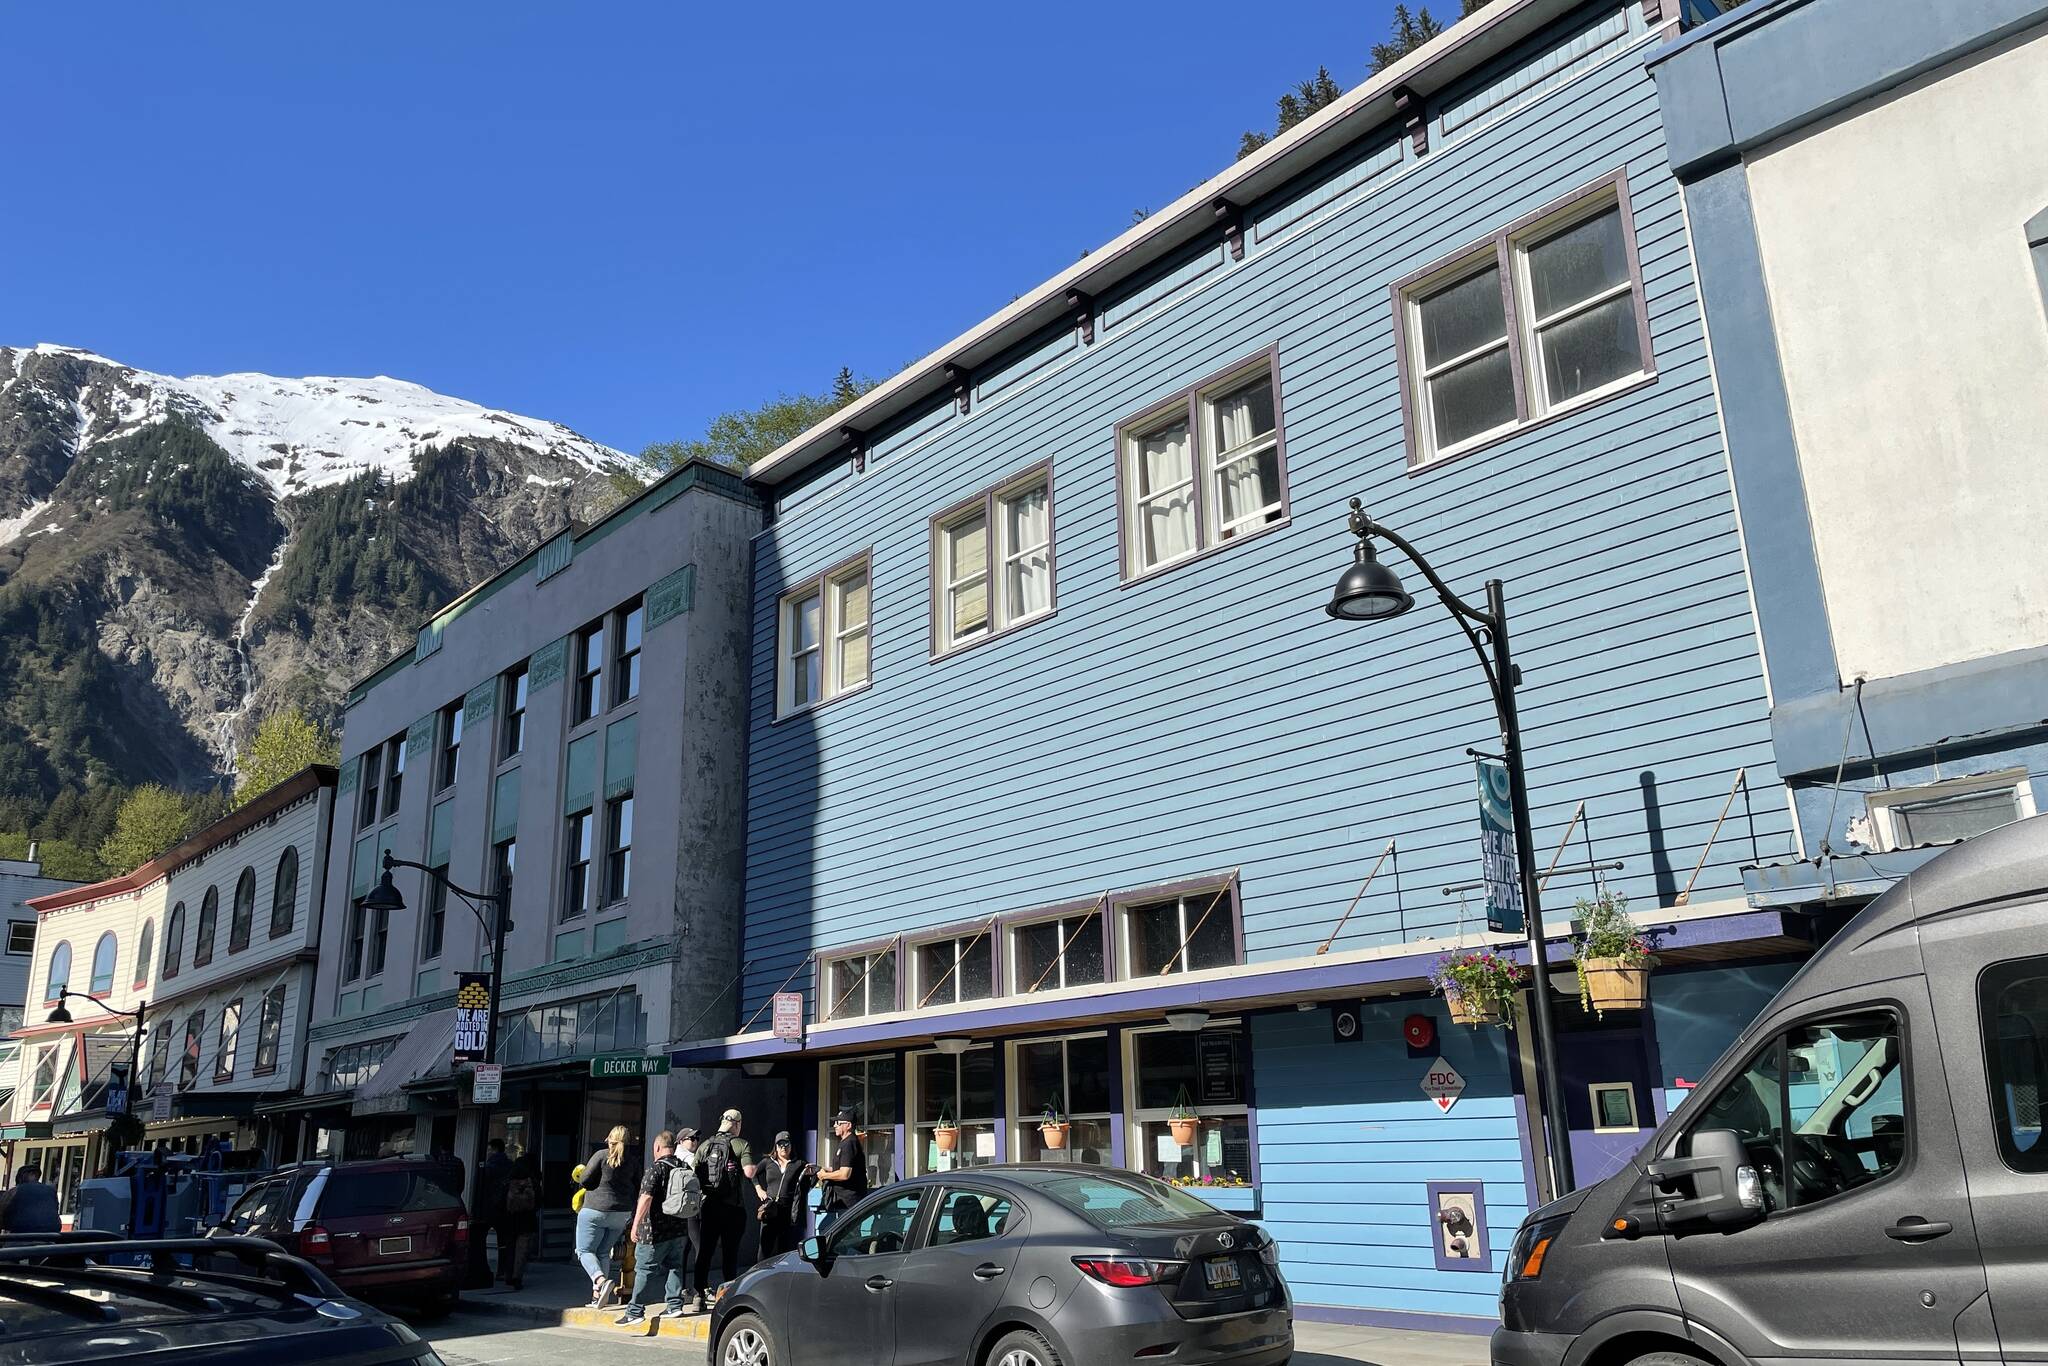 The future of the old Glory Hall building on South Franklin Street is in a state of uncertainty, with permitting to refit the interior to affordable housing denied by the City and Borough of Juneau. (Michael S. Lockett / Juneau Empire)